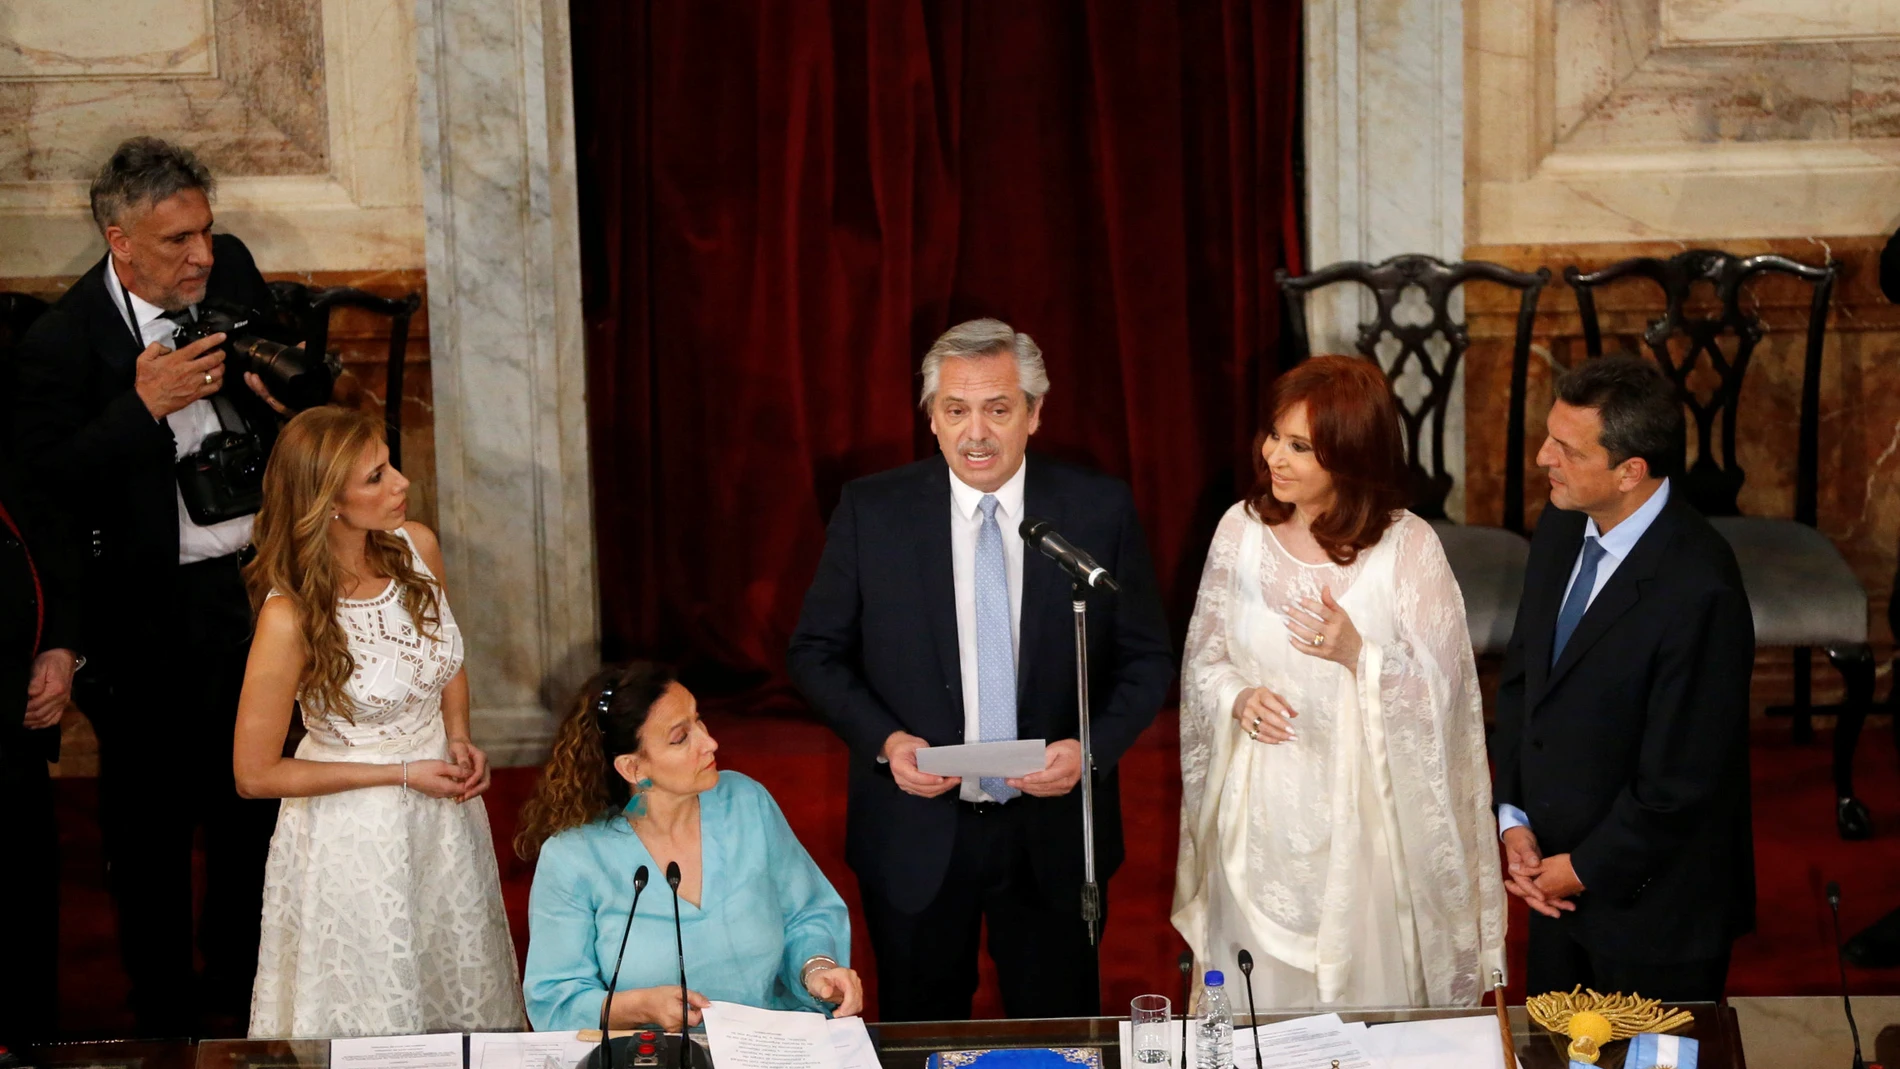 Inauguration of Argentina's President Alberto Fernandez in Buenos Aires